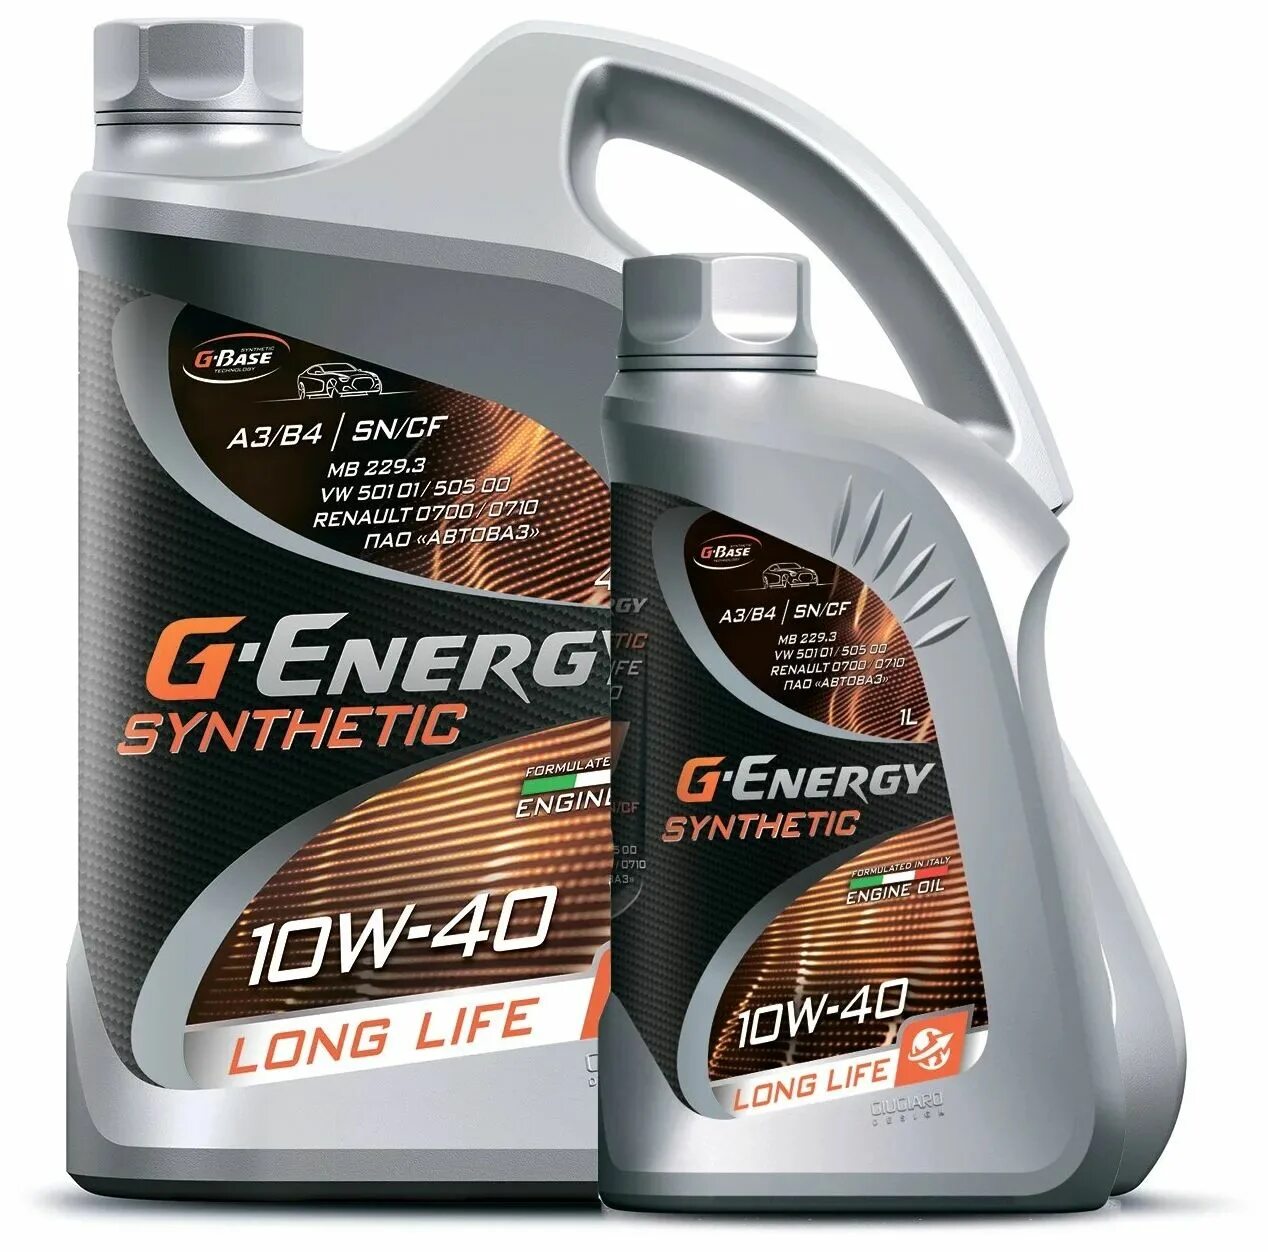 G-Energy Synthetic far East 5w-30 4л. G-Energy 5w30 Synthetic. G-Energy Synthetic Active 5w-30. G Energy 5w30 синтетика Active 1 л. Масло моторное 5w40 synthetic g energy